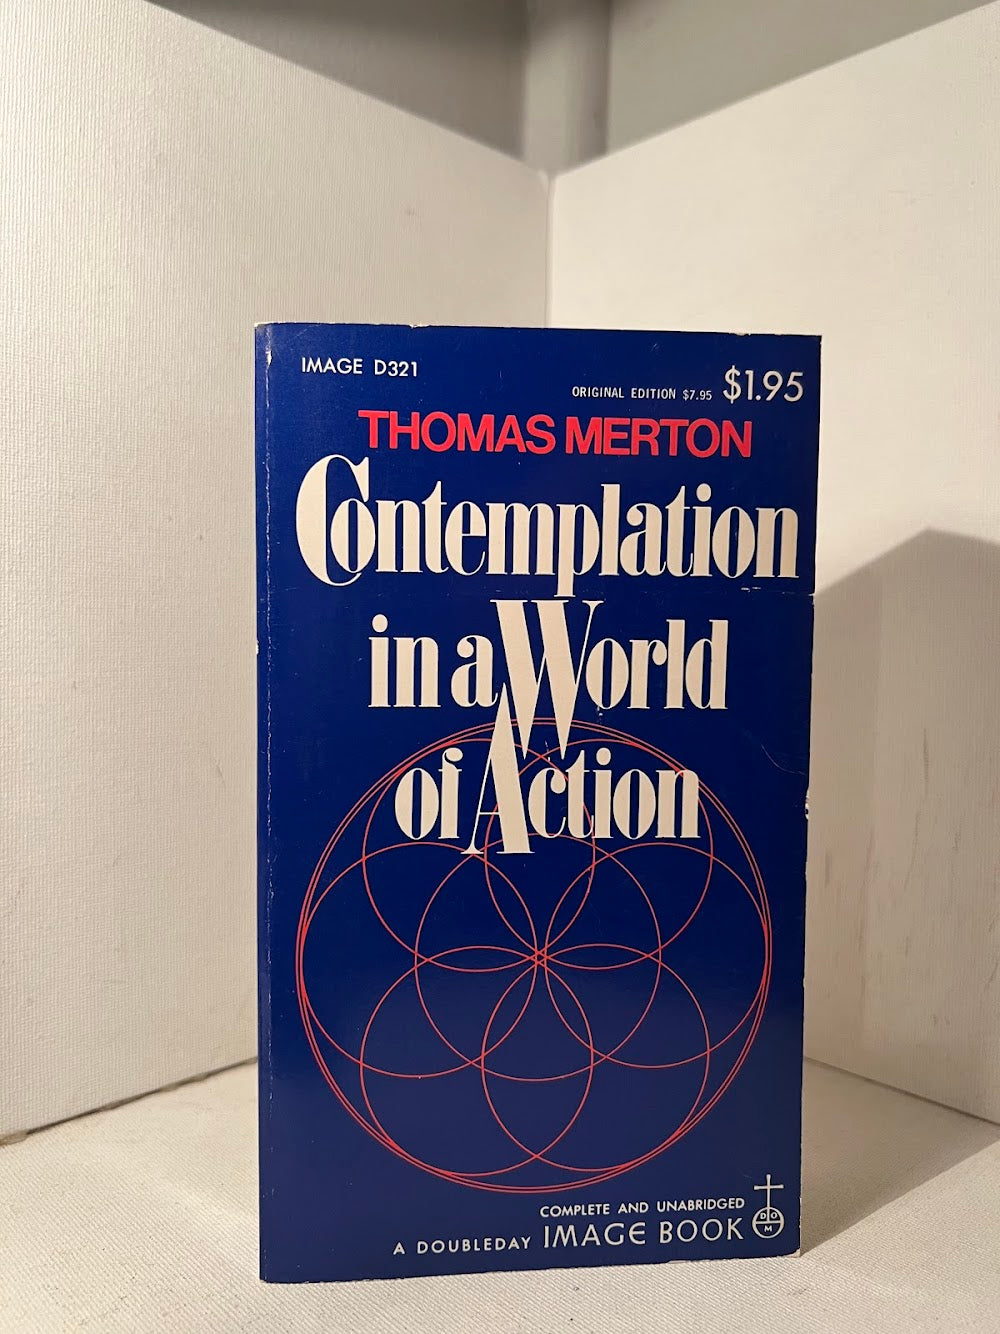 Contemplation in a World of Action by Thomas Merton